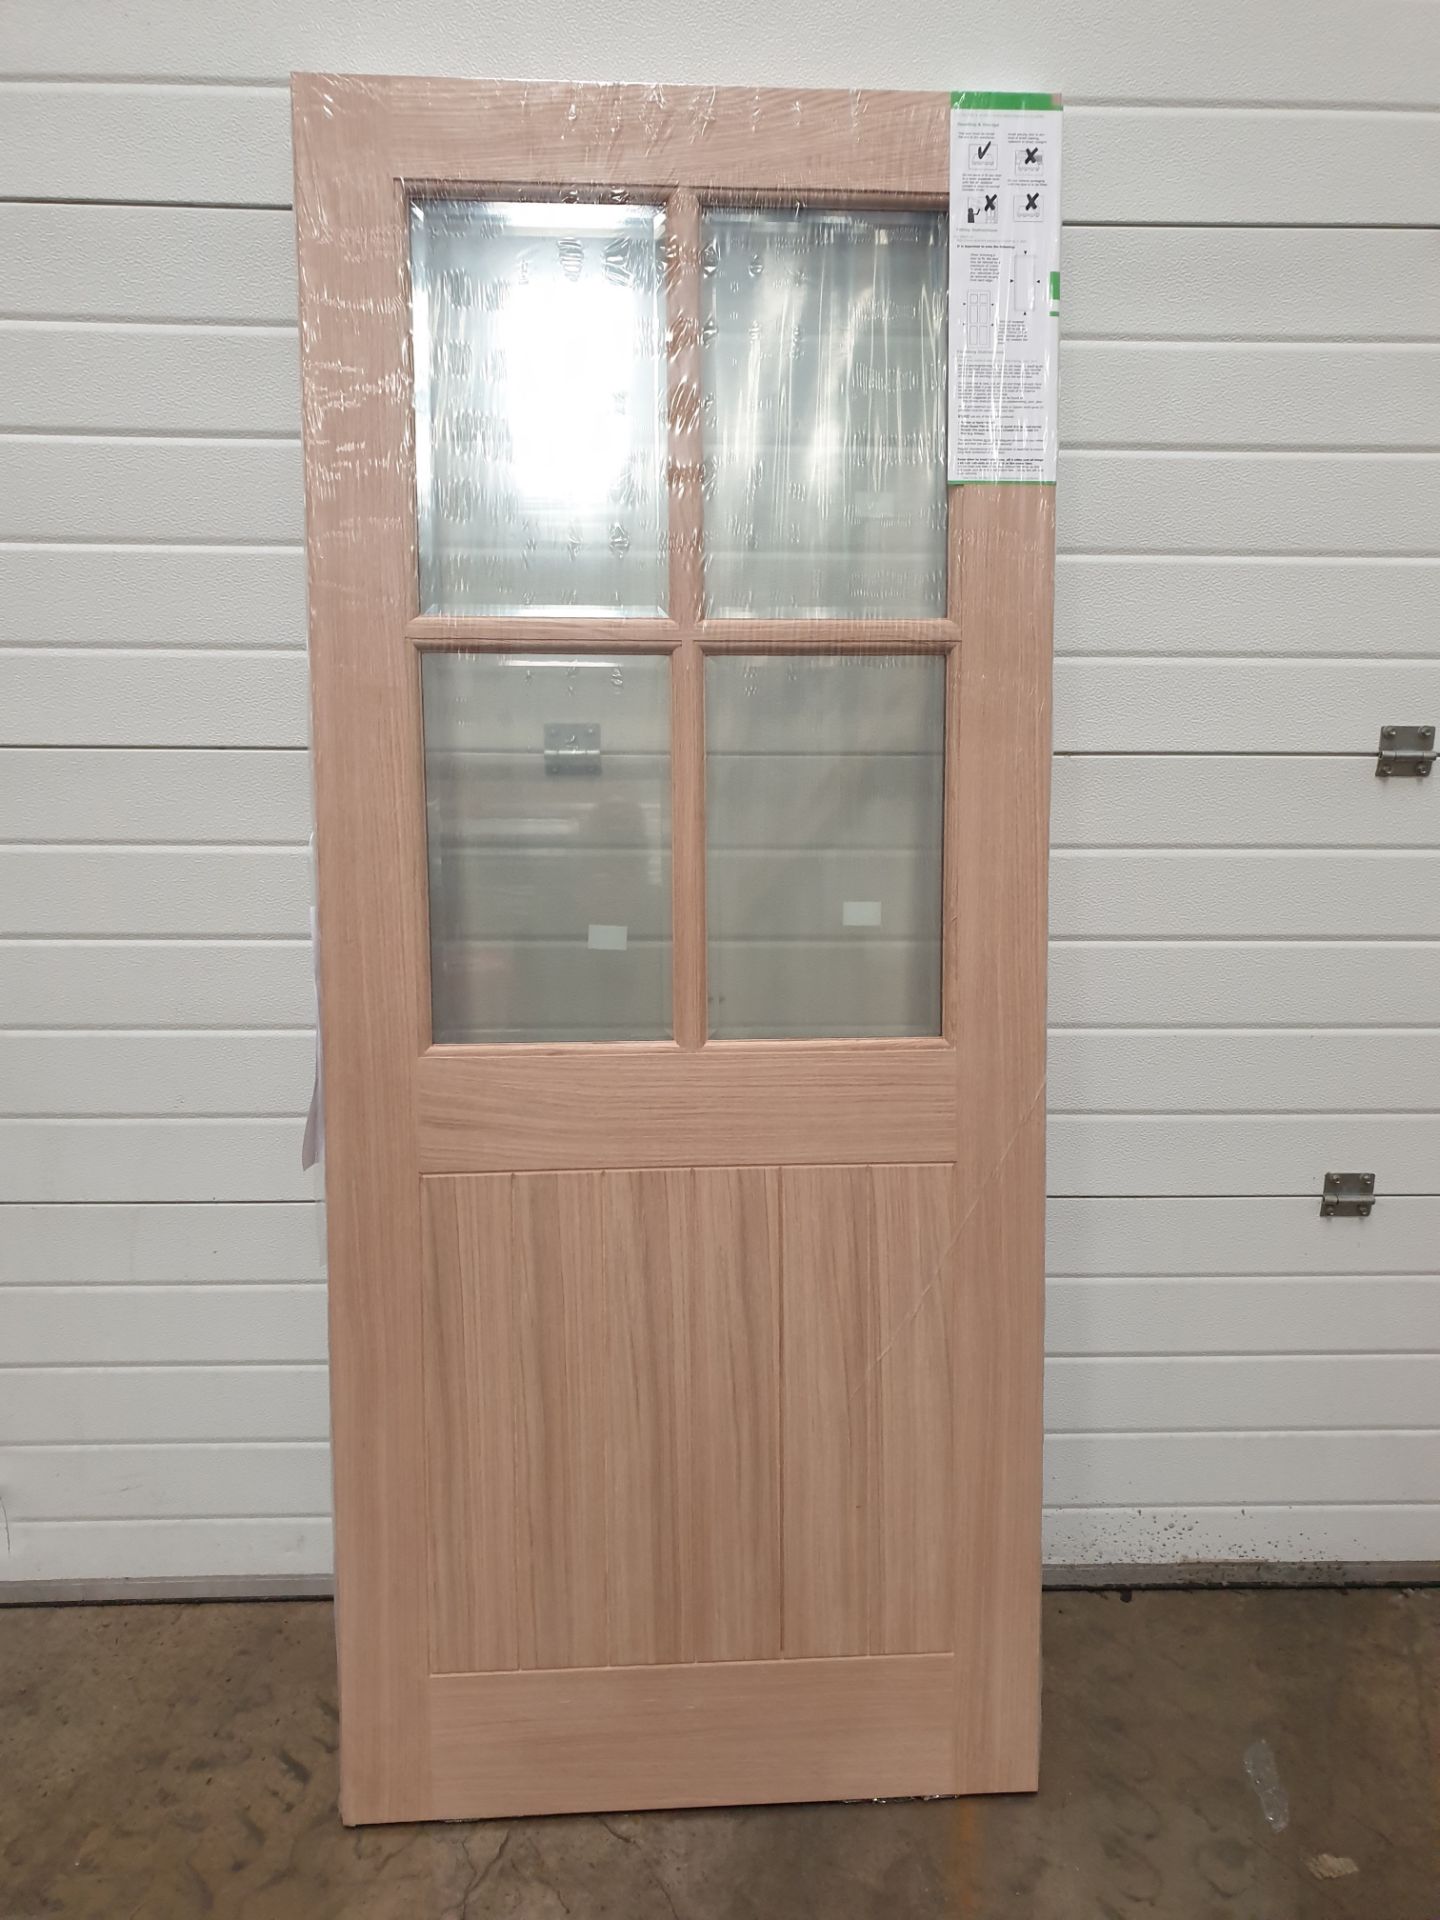 4 x External Oak 4 Lite DG04LBEV30 Ext Door 1981x762x44mm - Lots to be handed out in order they